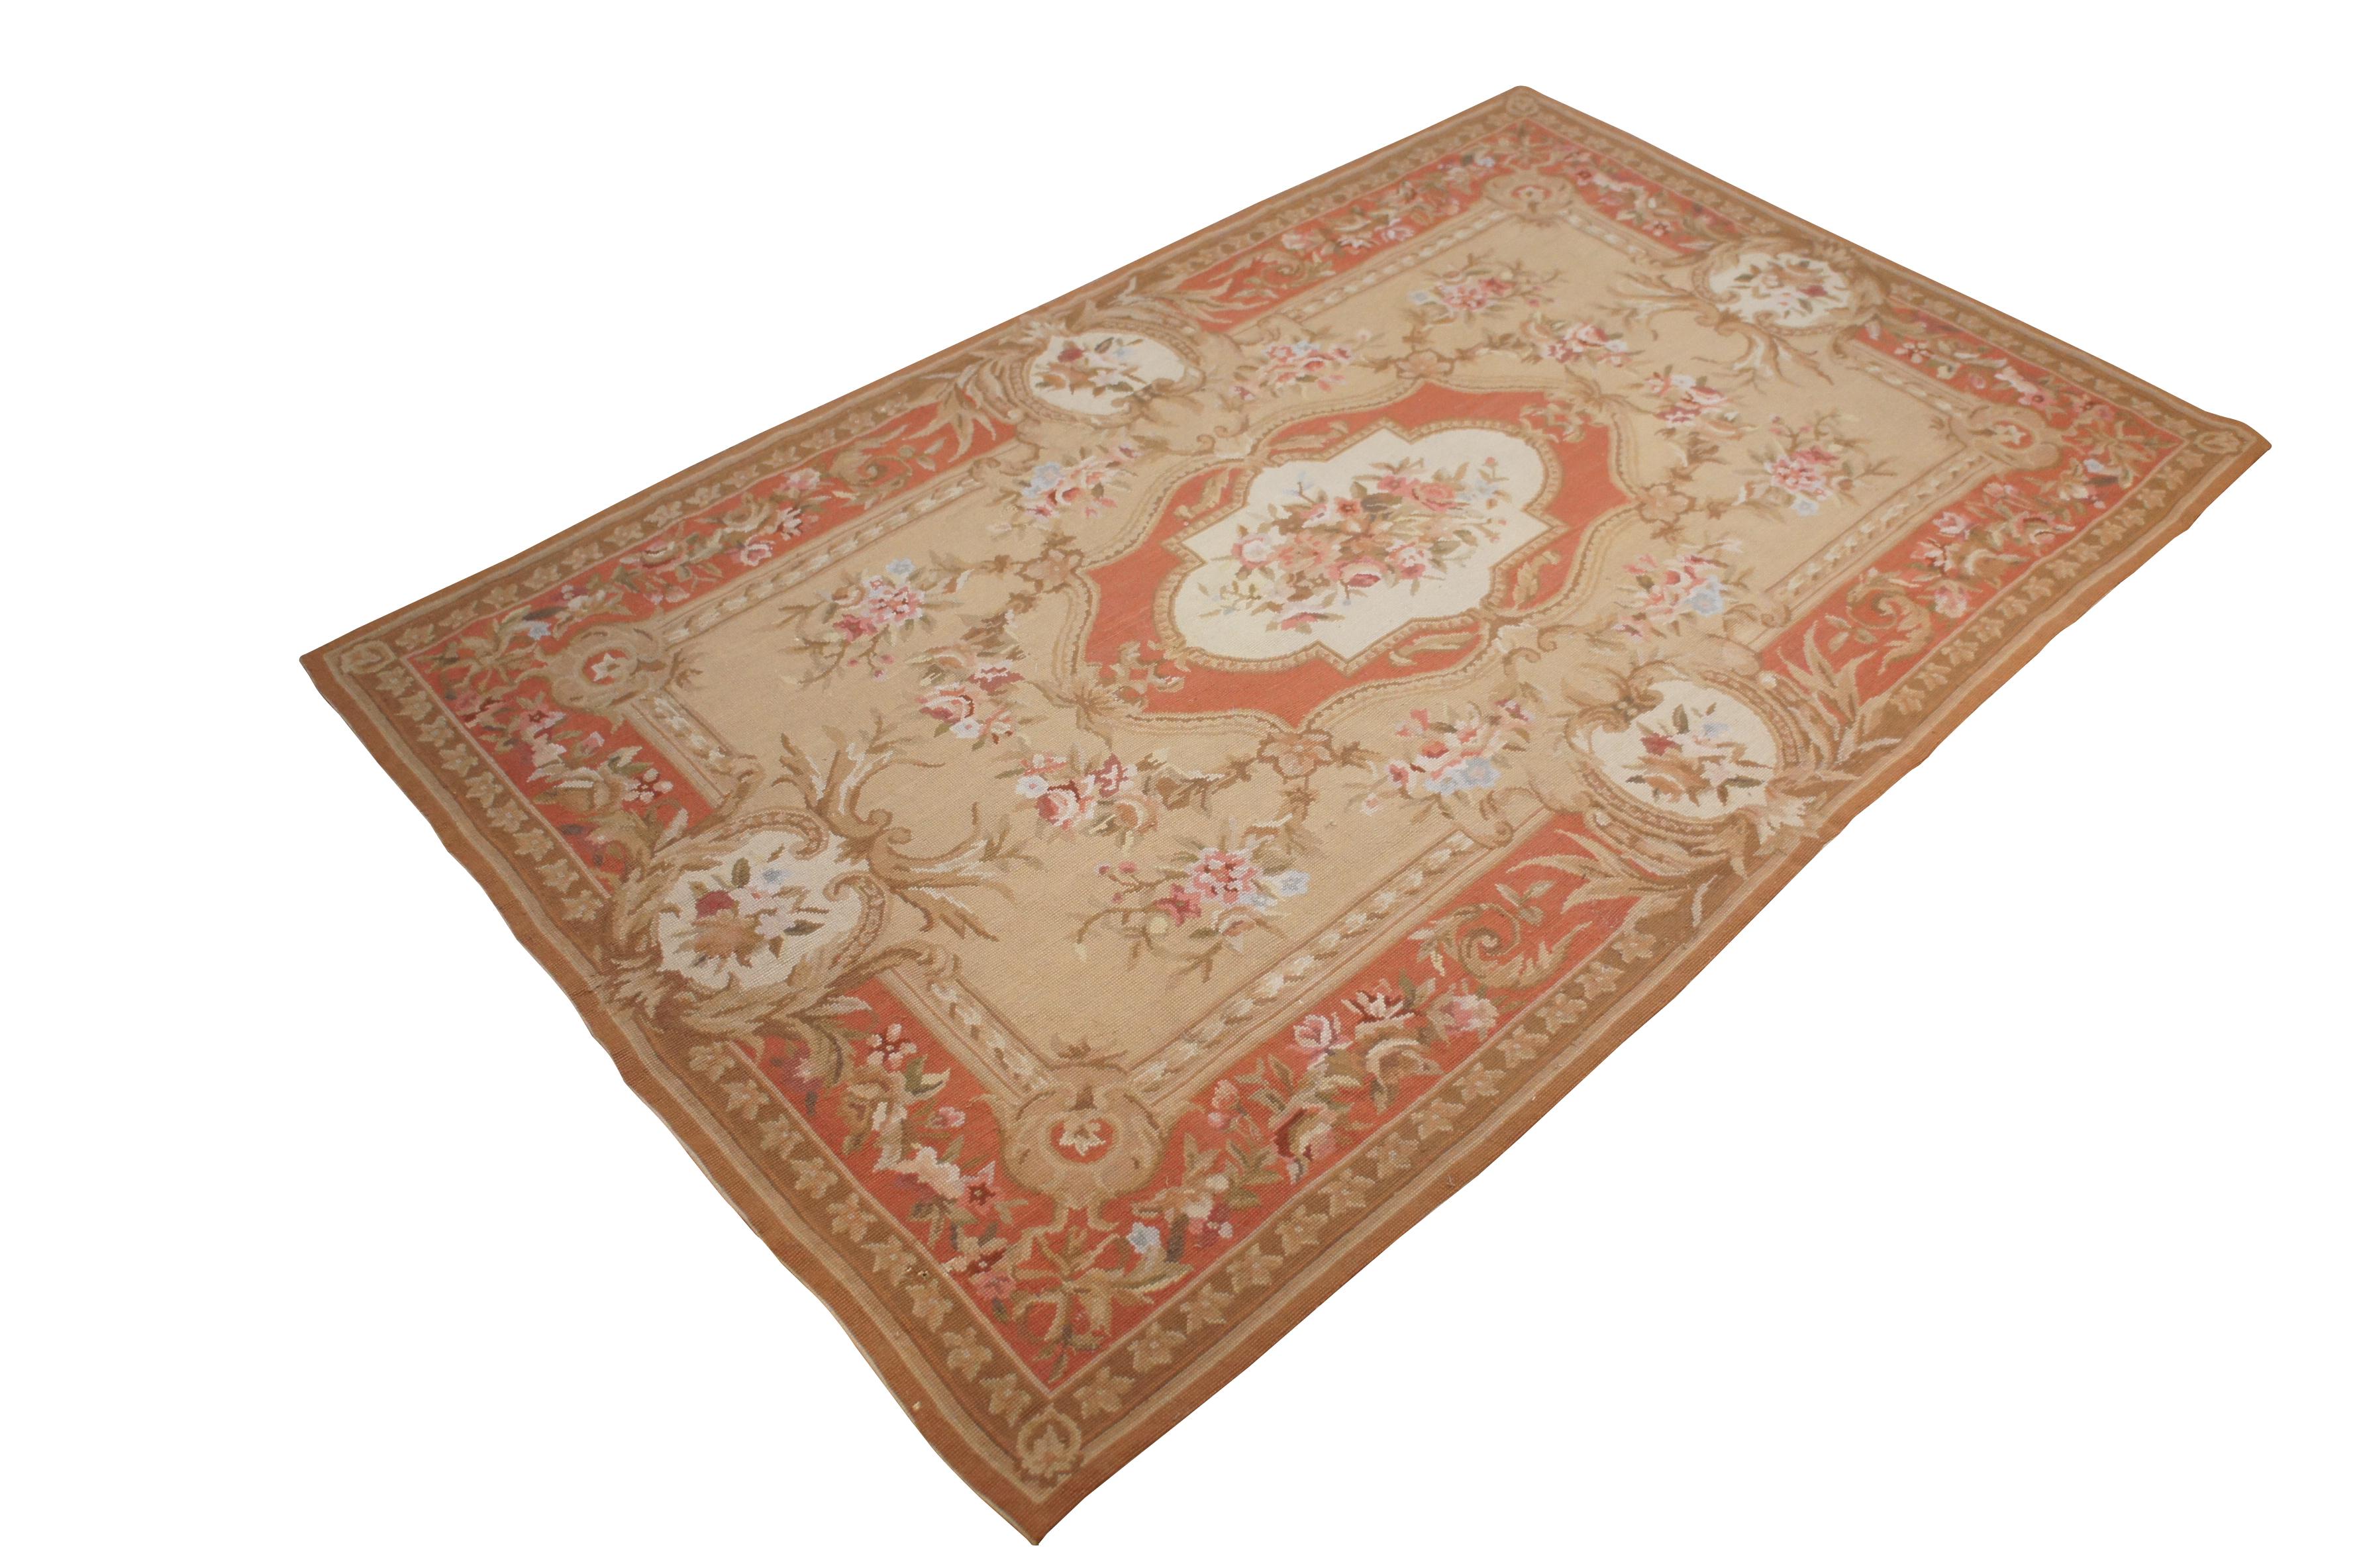 20th century hand embroidered French Aubusson needlepoint tapestry rug / carpet featuring a floral design of pink and blue flowers on concentric frames of peach / pink, beige, and cream.


Dimensions:
70